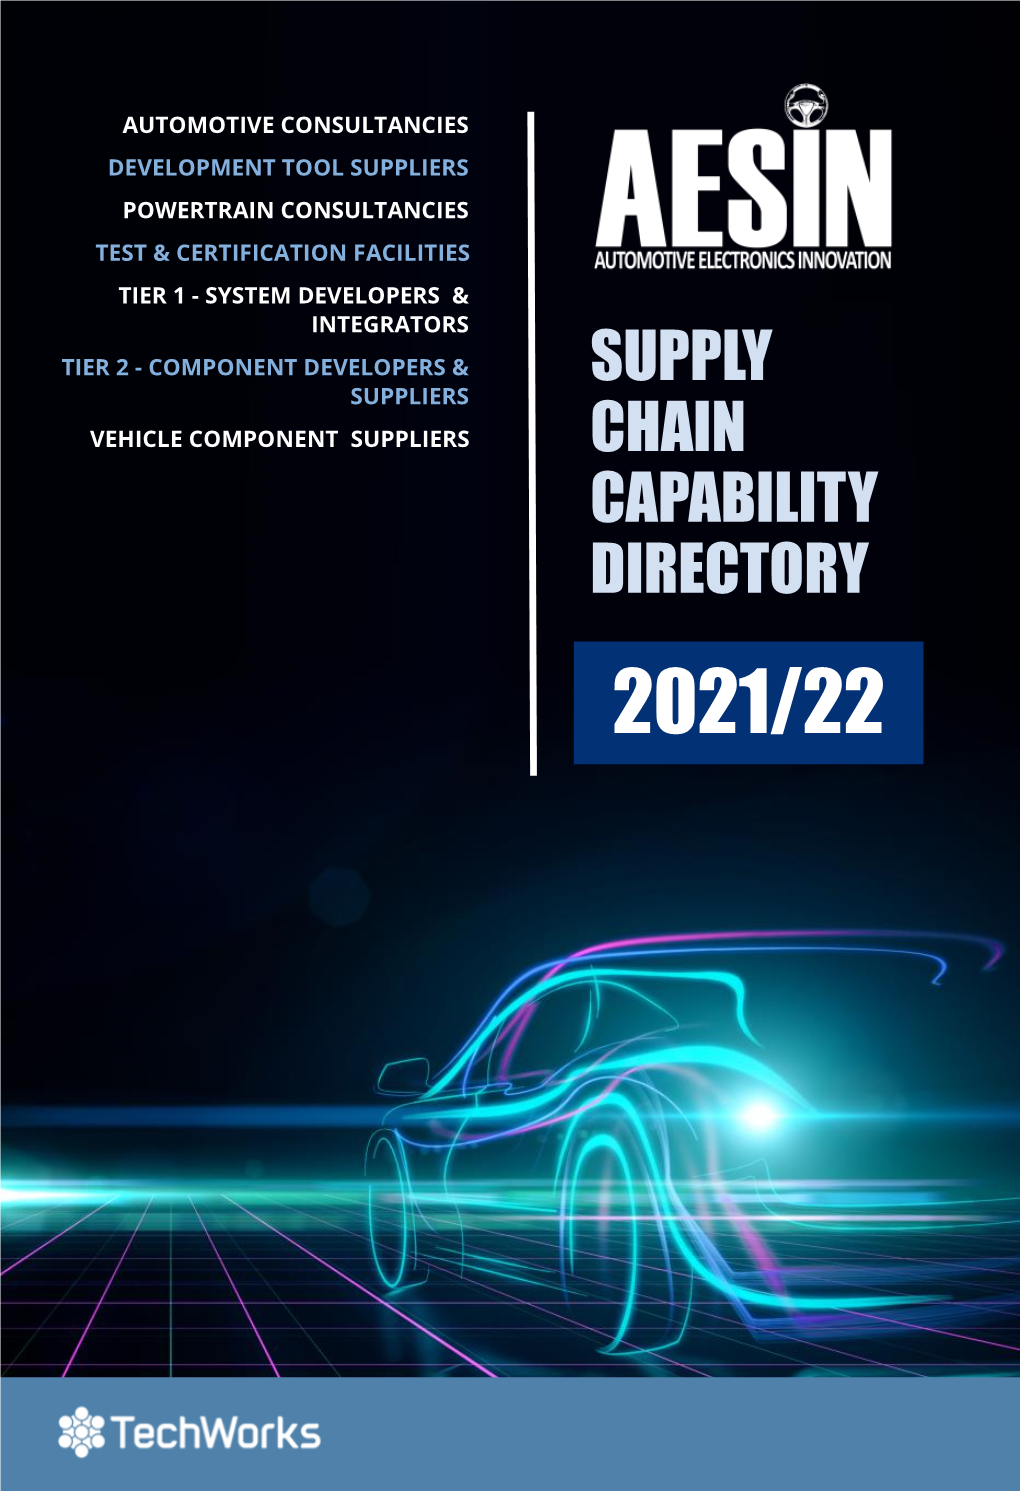 Supply Chain Capability Directory Which Provides a Rich Resource of UK Based Organisations Offering Automotive Electronics Services and Solutions